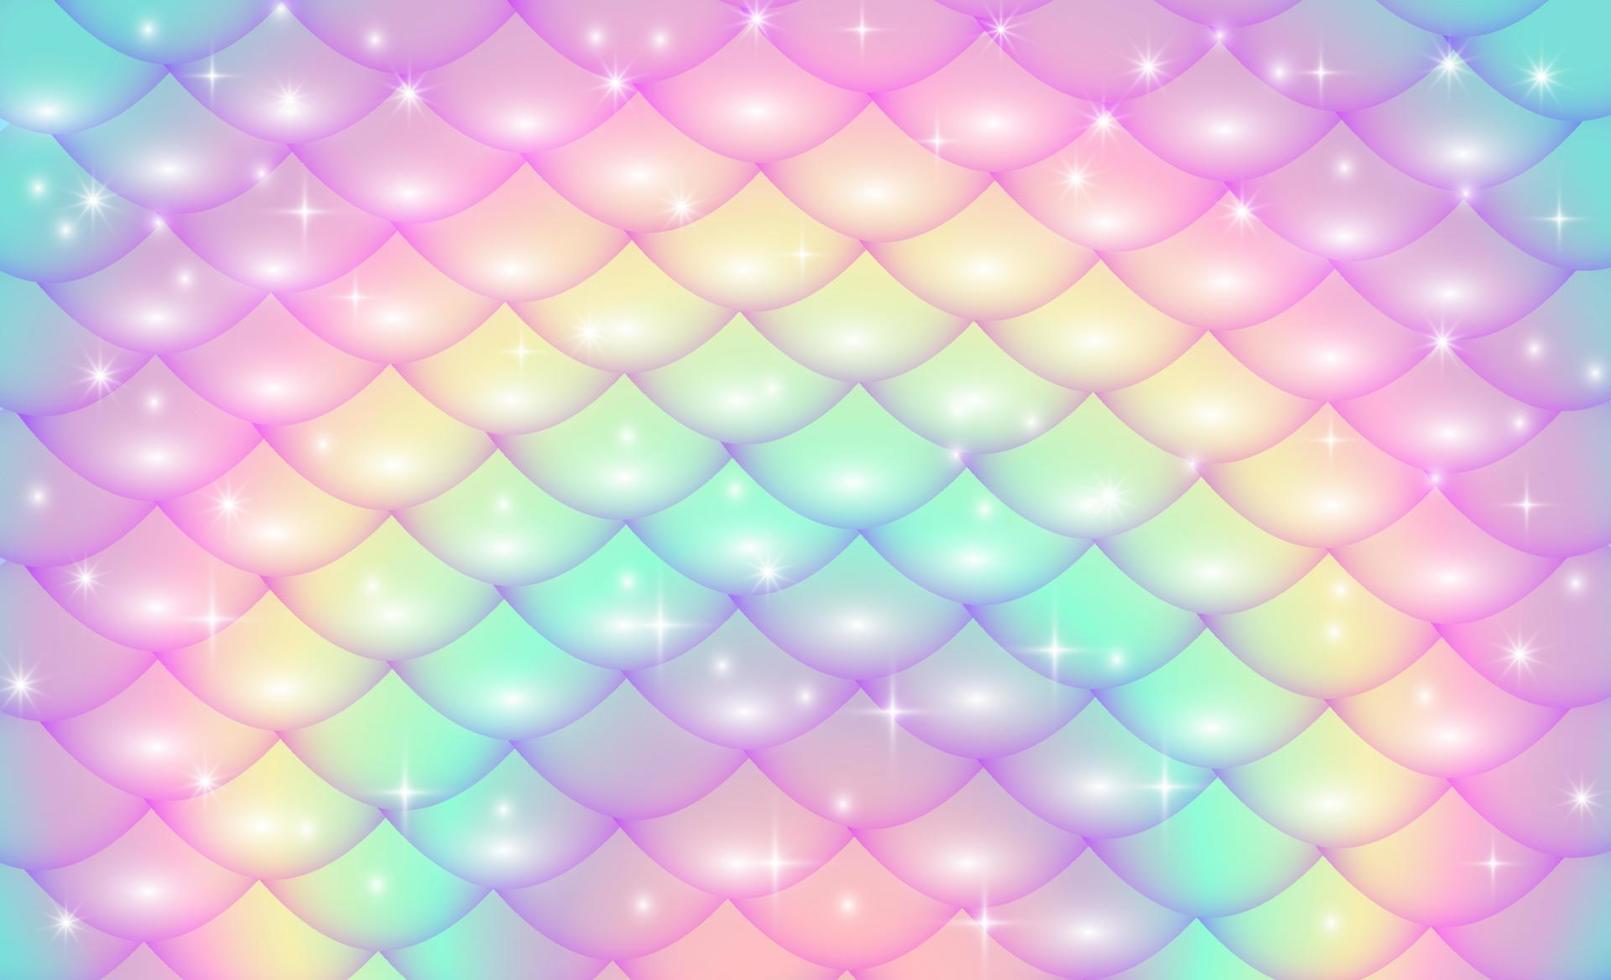 Colored mermaid scales, fish scales. Fantasy background in sparkling stars for design. Vector illustration.